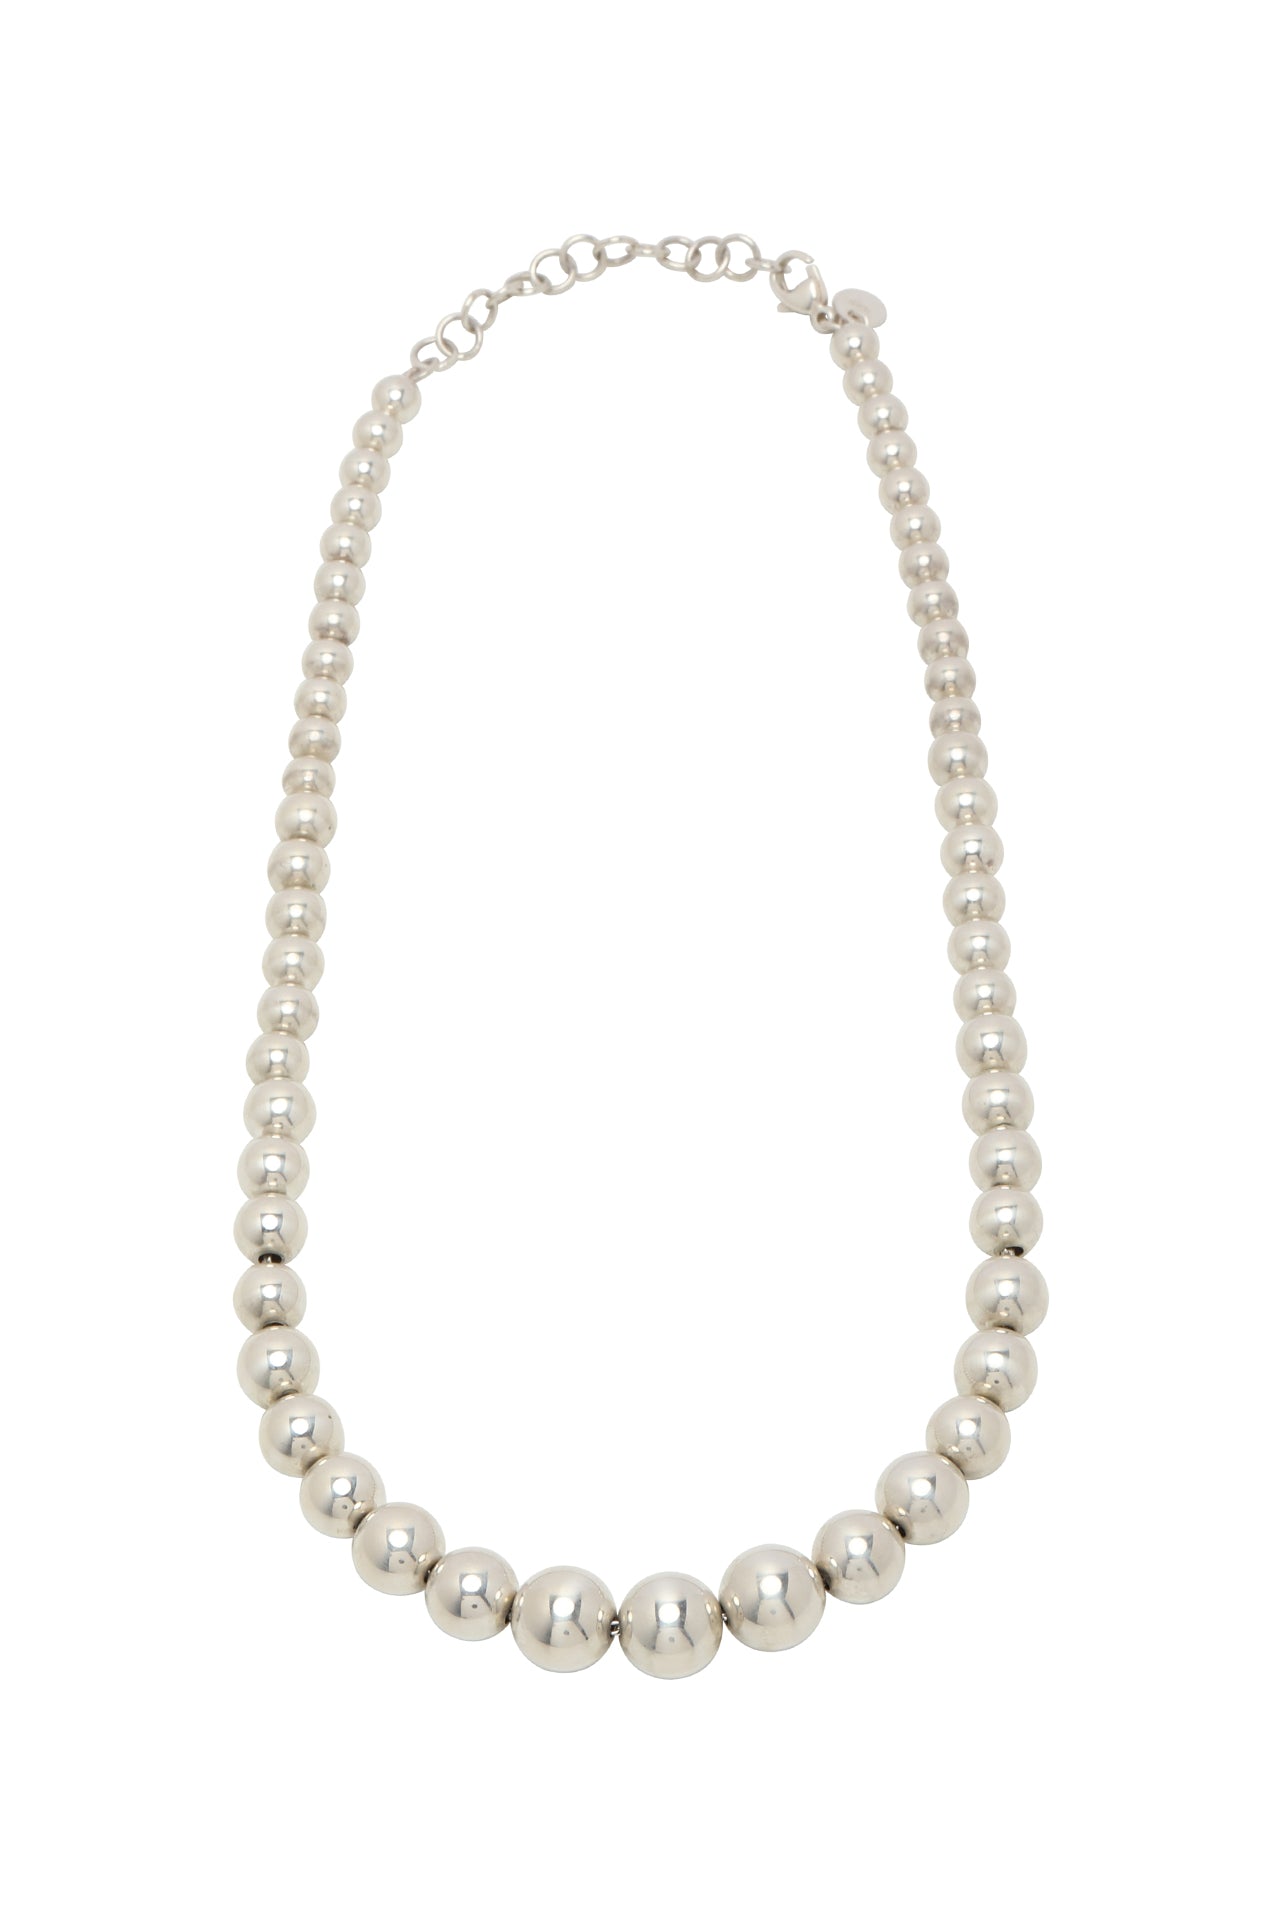 Tiffany Pearl Necklace